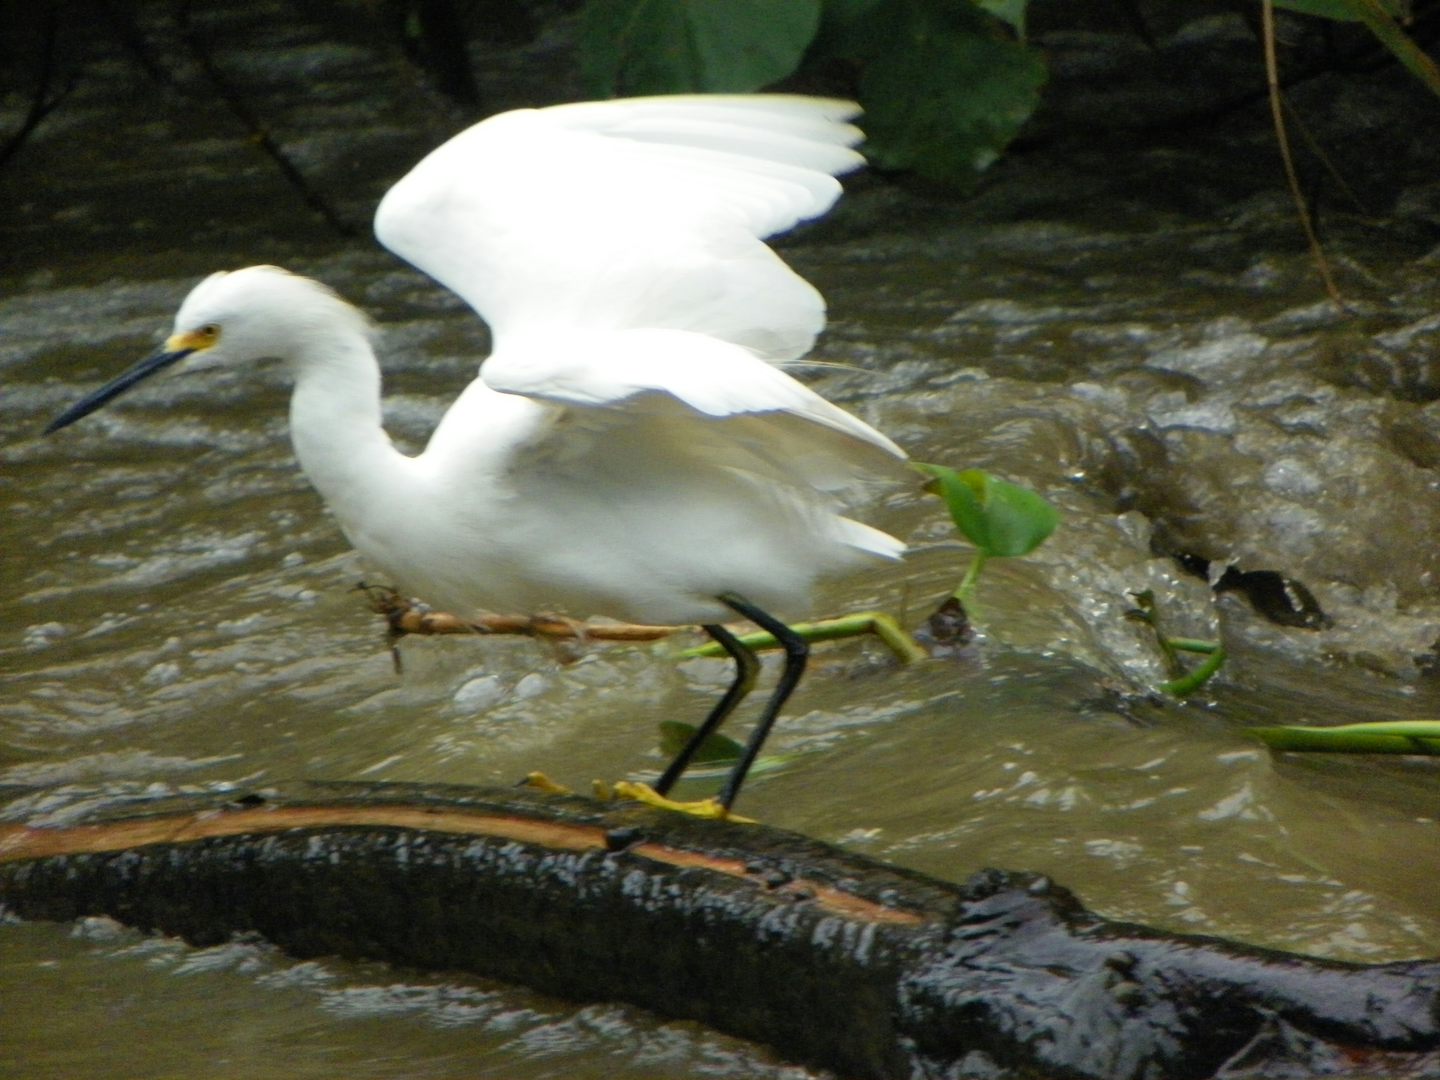 Canal wildlife in Costa Rica.